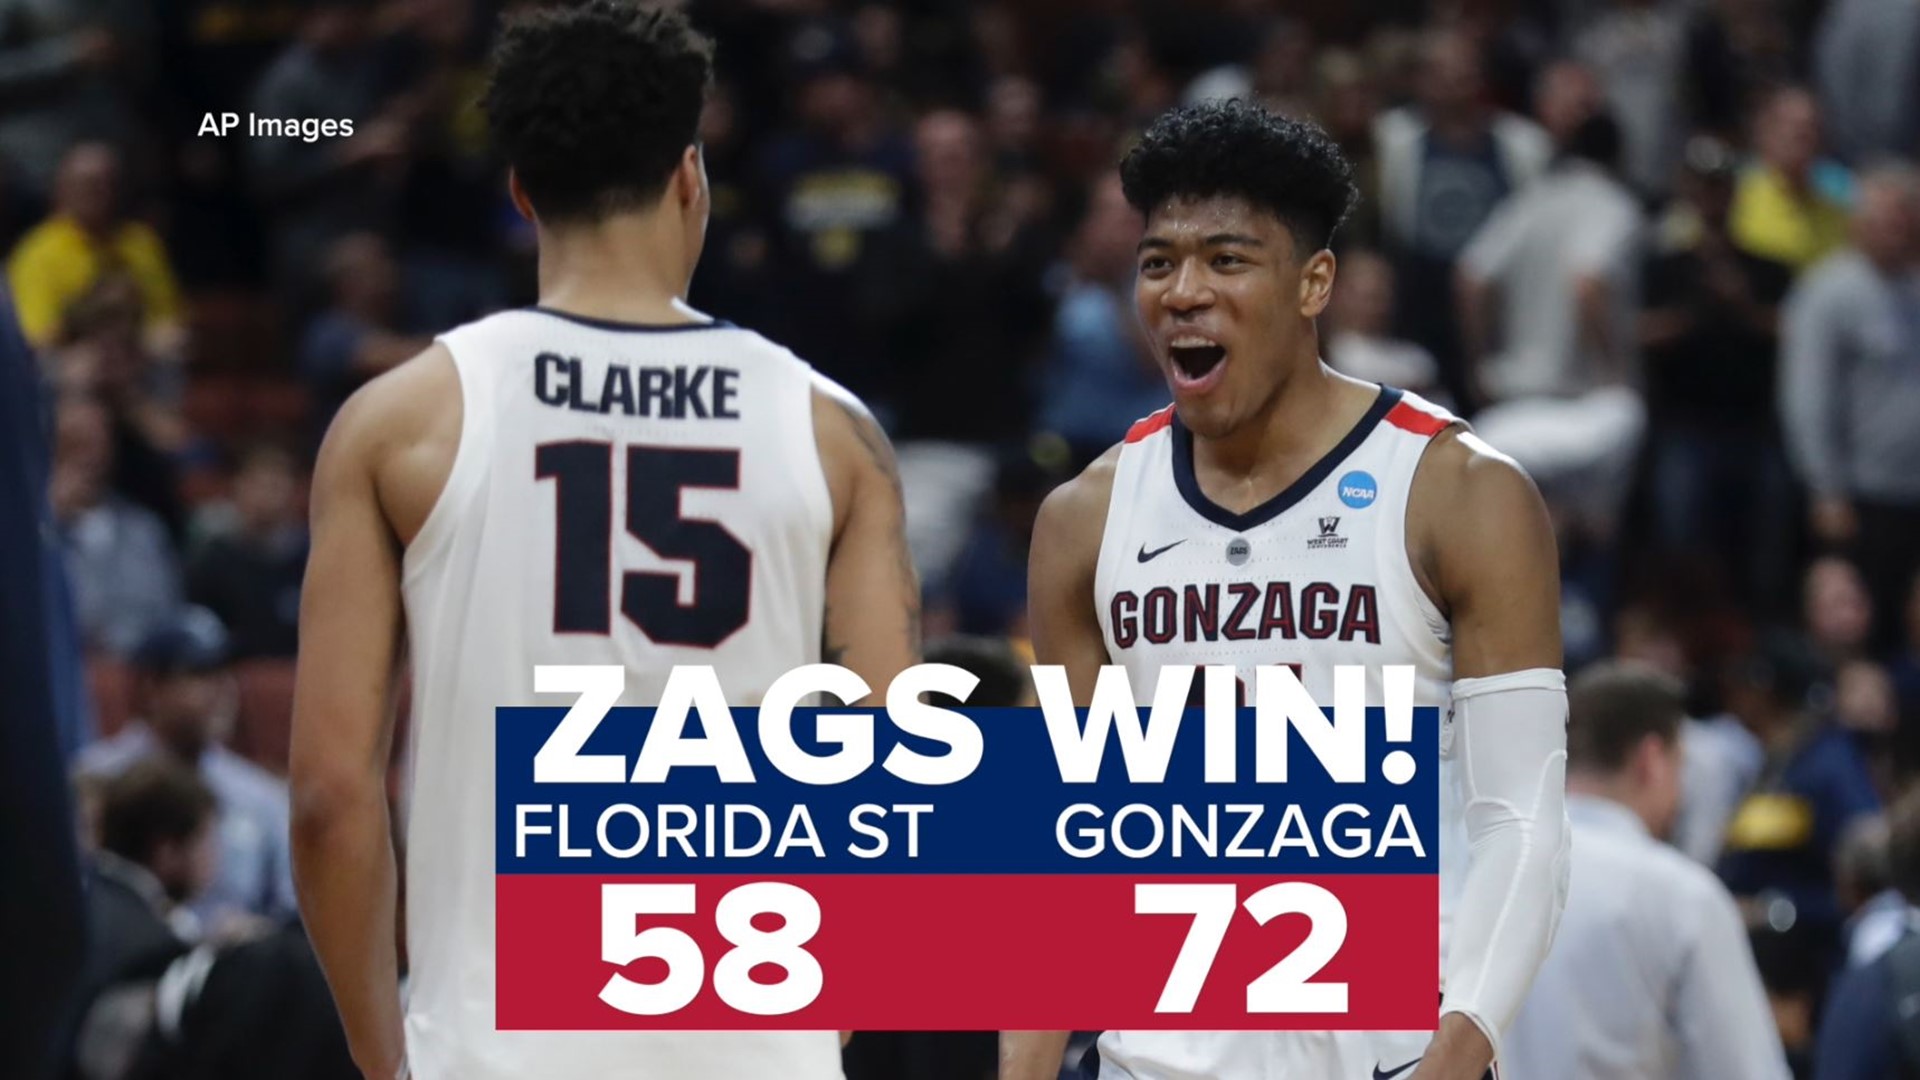 Gonzaga is in the Elite Eight for the fourth time in history following a 72-58 victory over Florida State in the opening West regional semifinal on Thursday night.